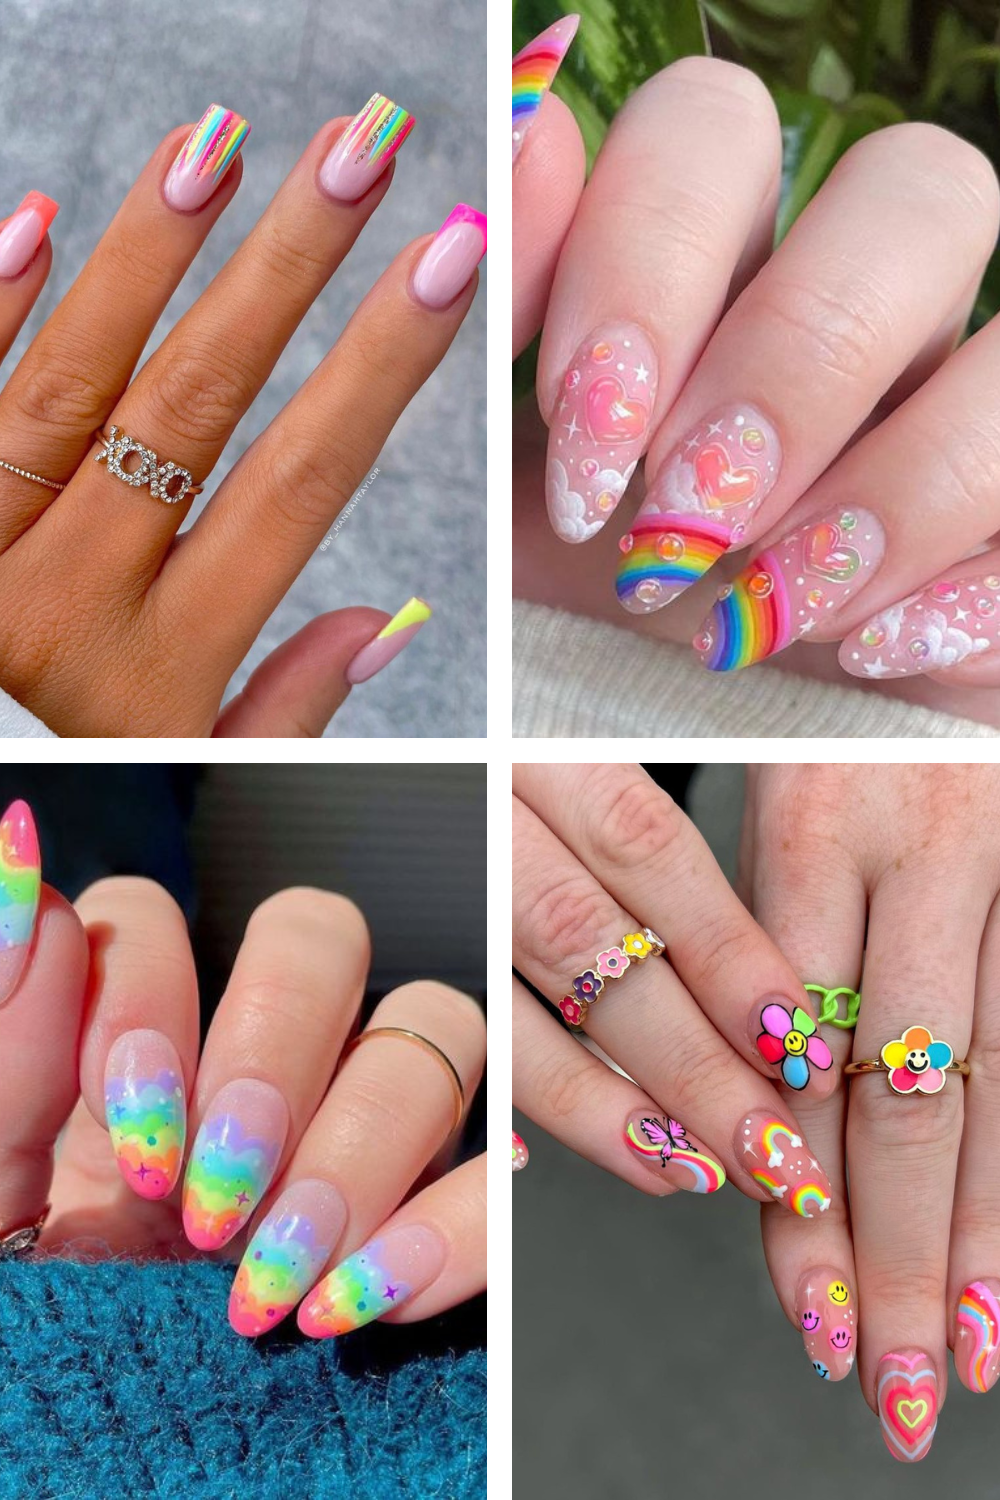 45 Utterly Perfect Rainbow Nails to Recreate!